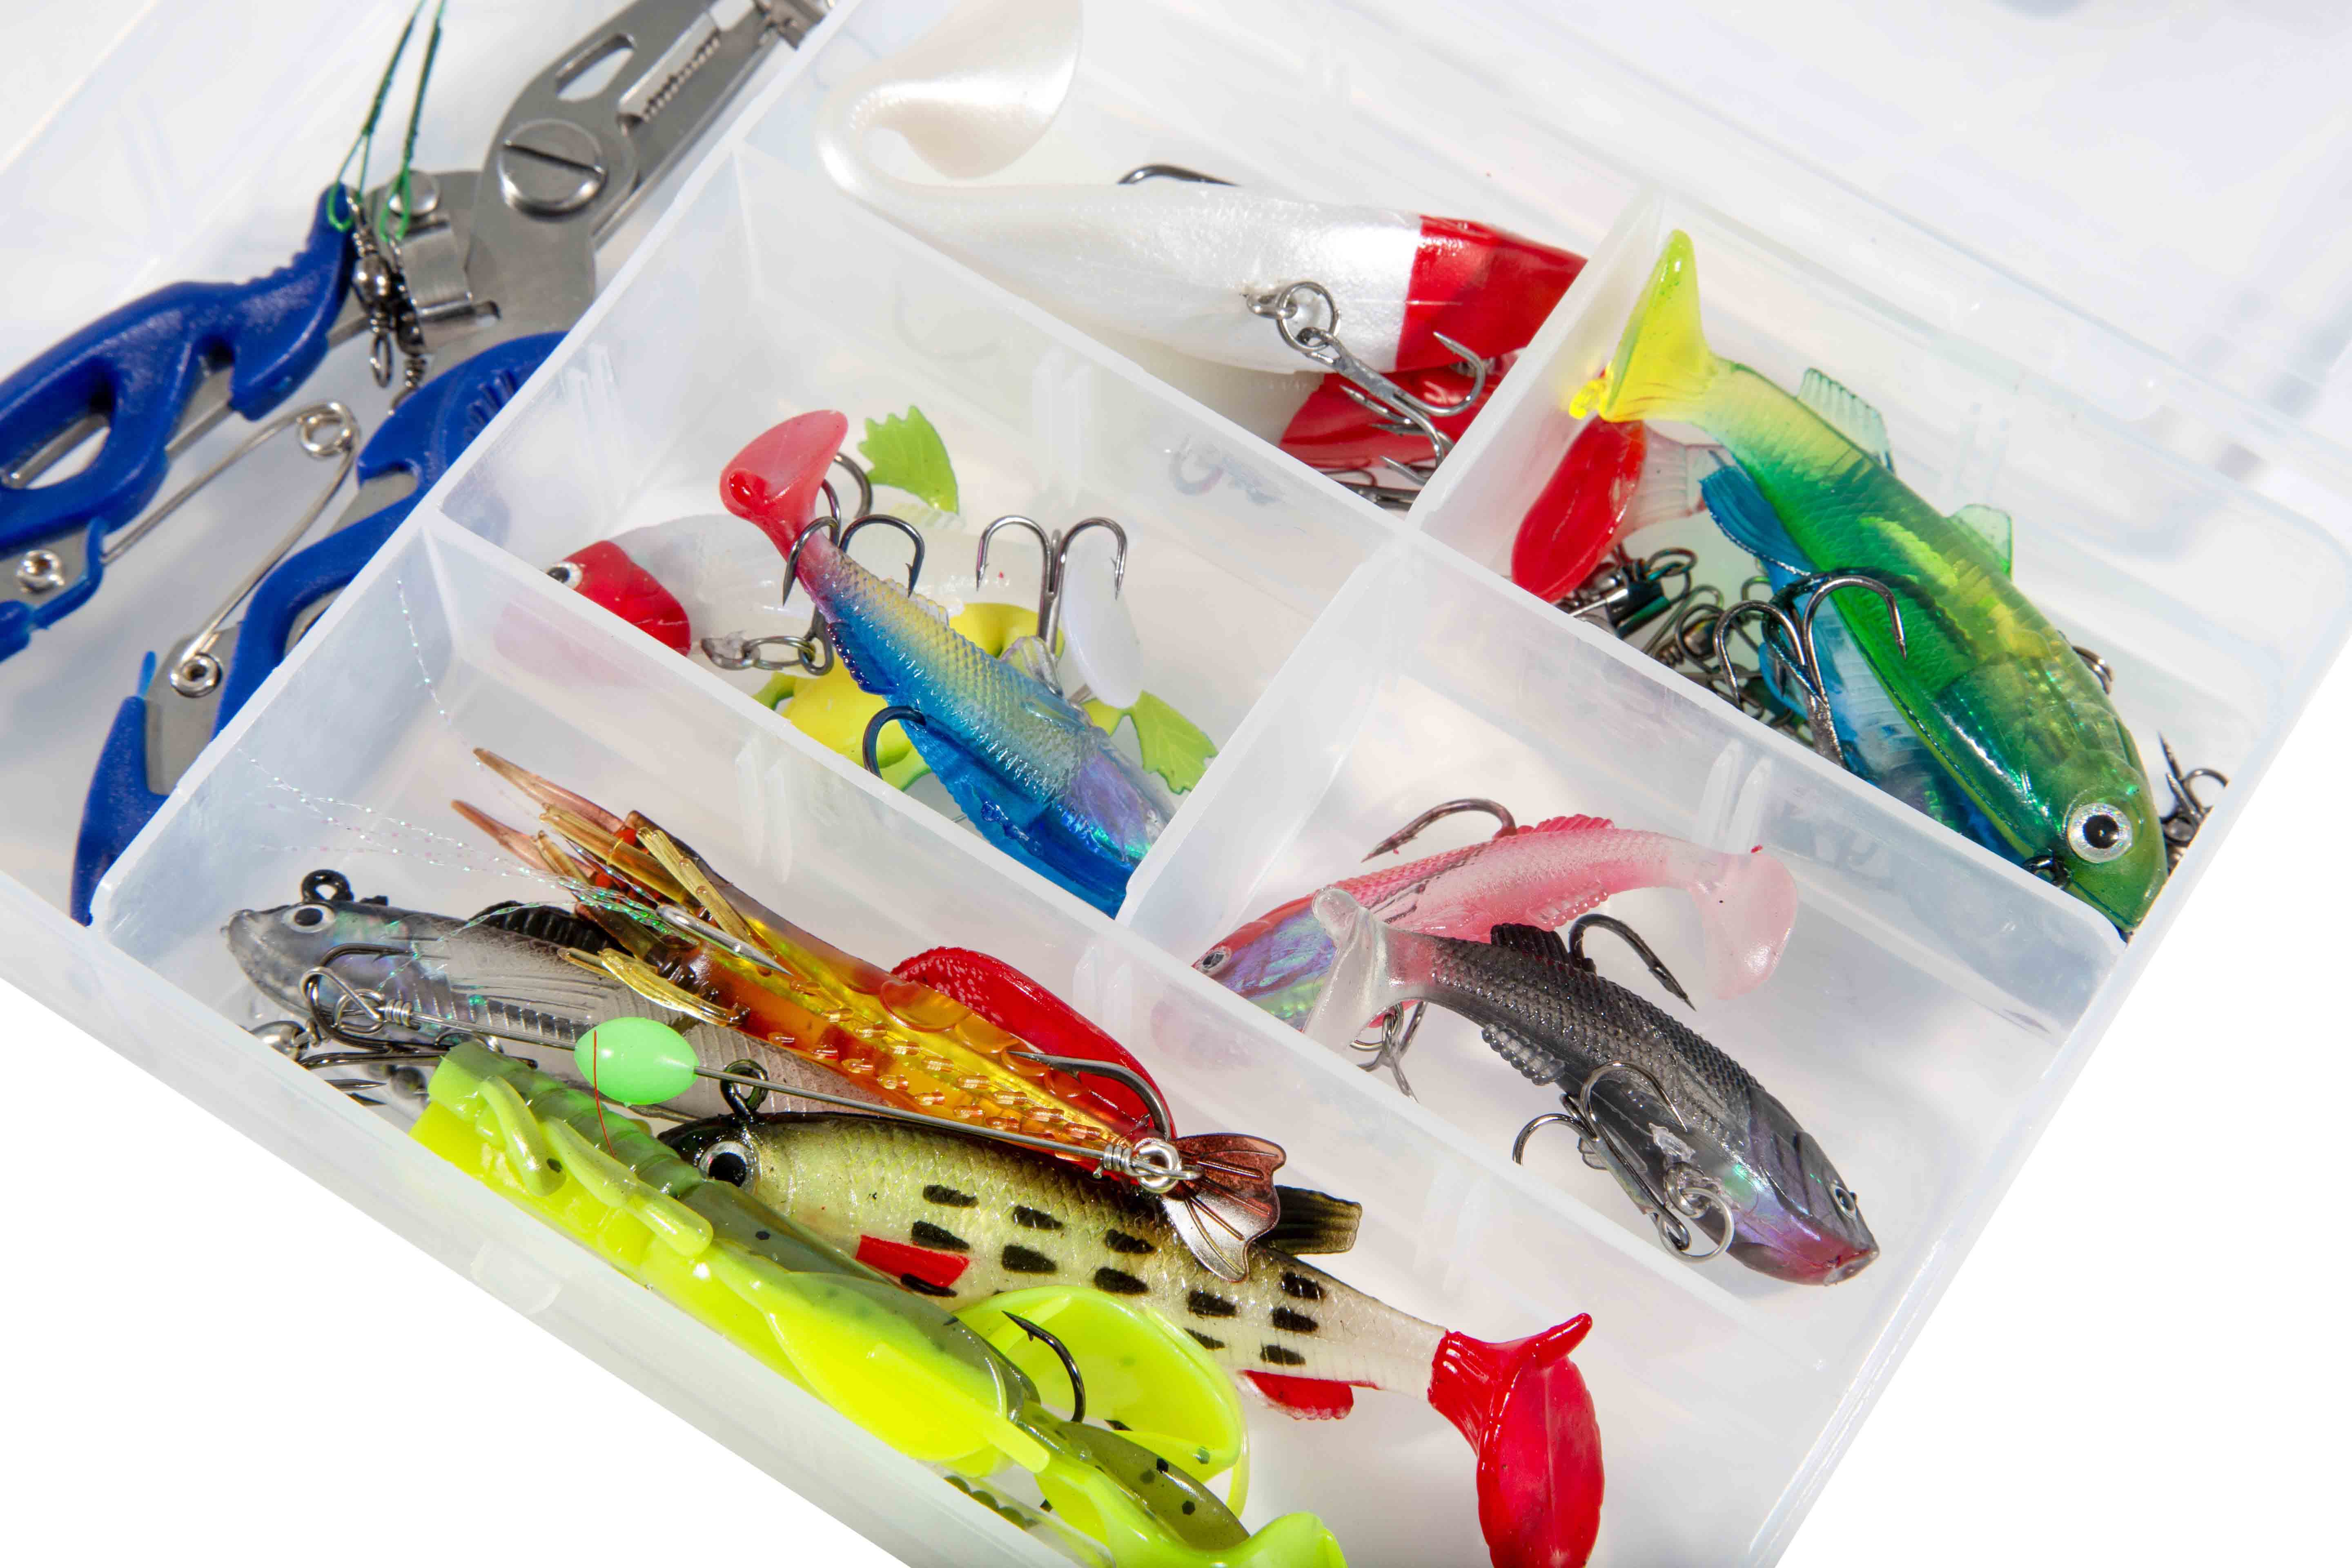 Fish4All Multi Lure Box With Pliers (34pcs)